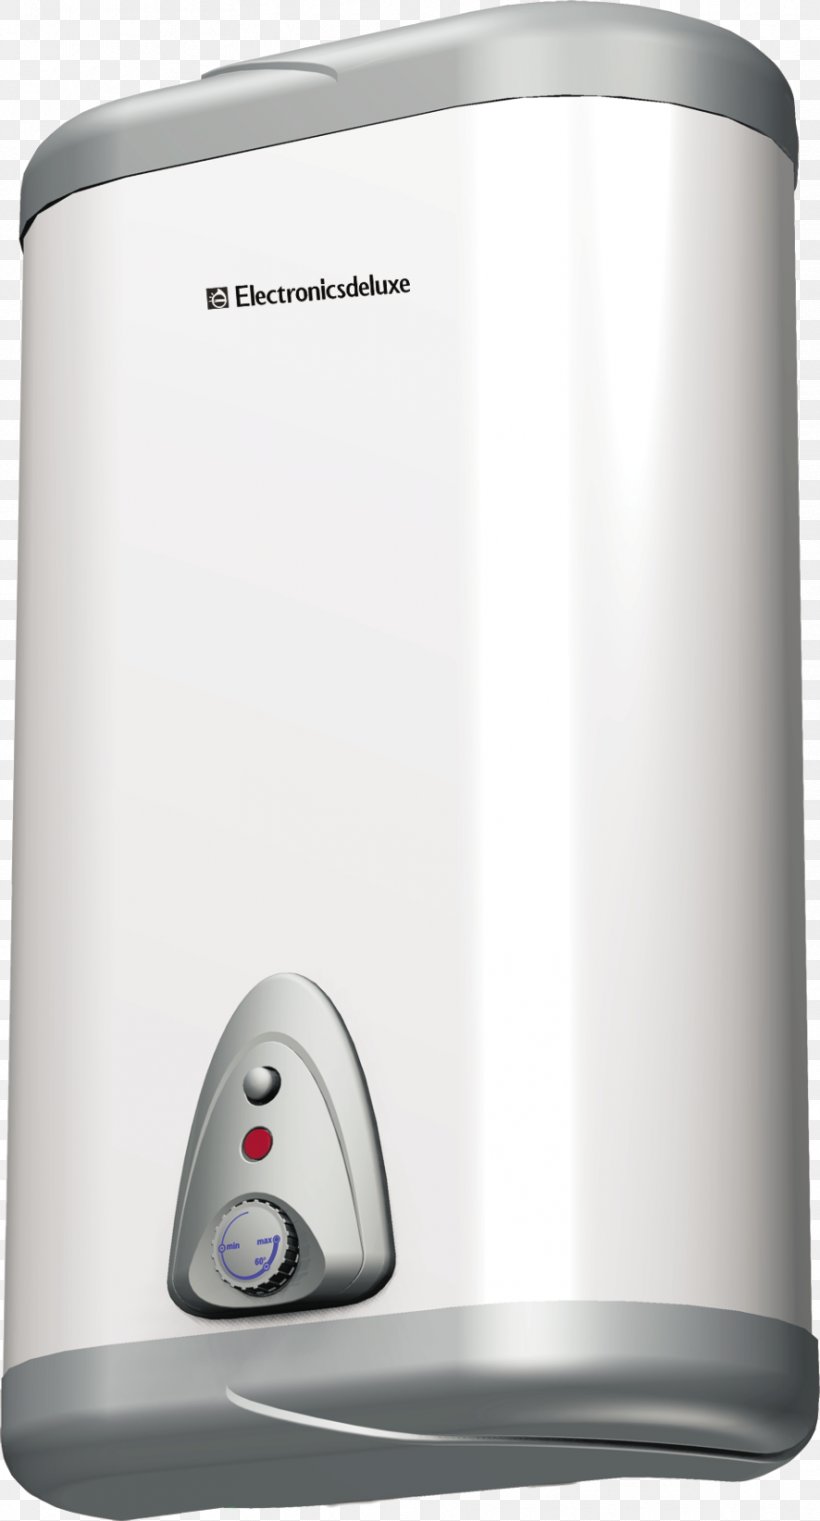 Small Appliance Home Appliance, PNG, 886x1644px, Small Appliance, Home Appliance Download Free